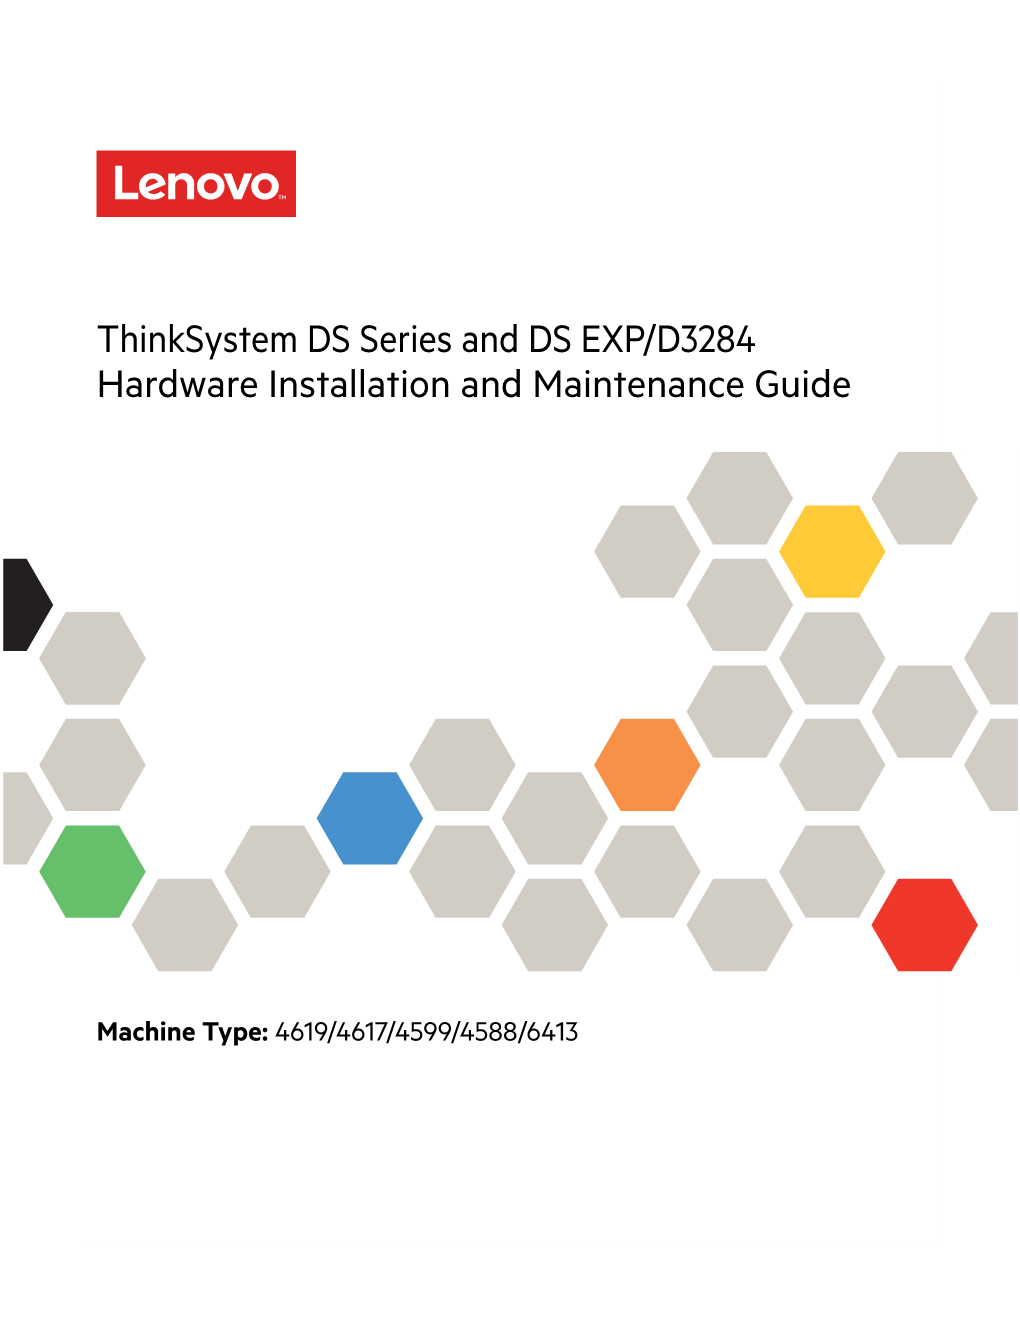 Thinksystem DS Series and DS EXP/D3284 Hardware Installation and Maintenance Guide